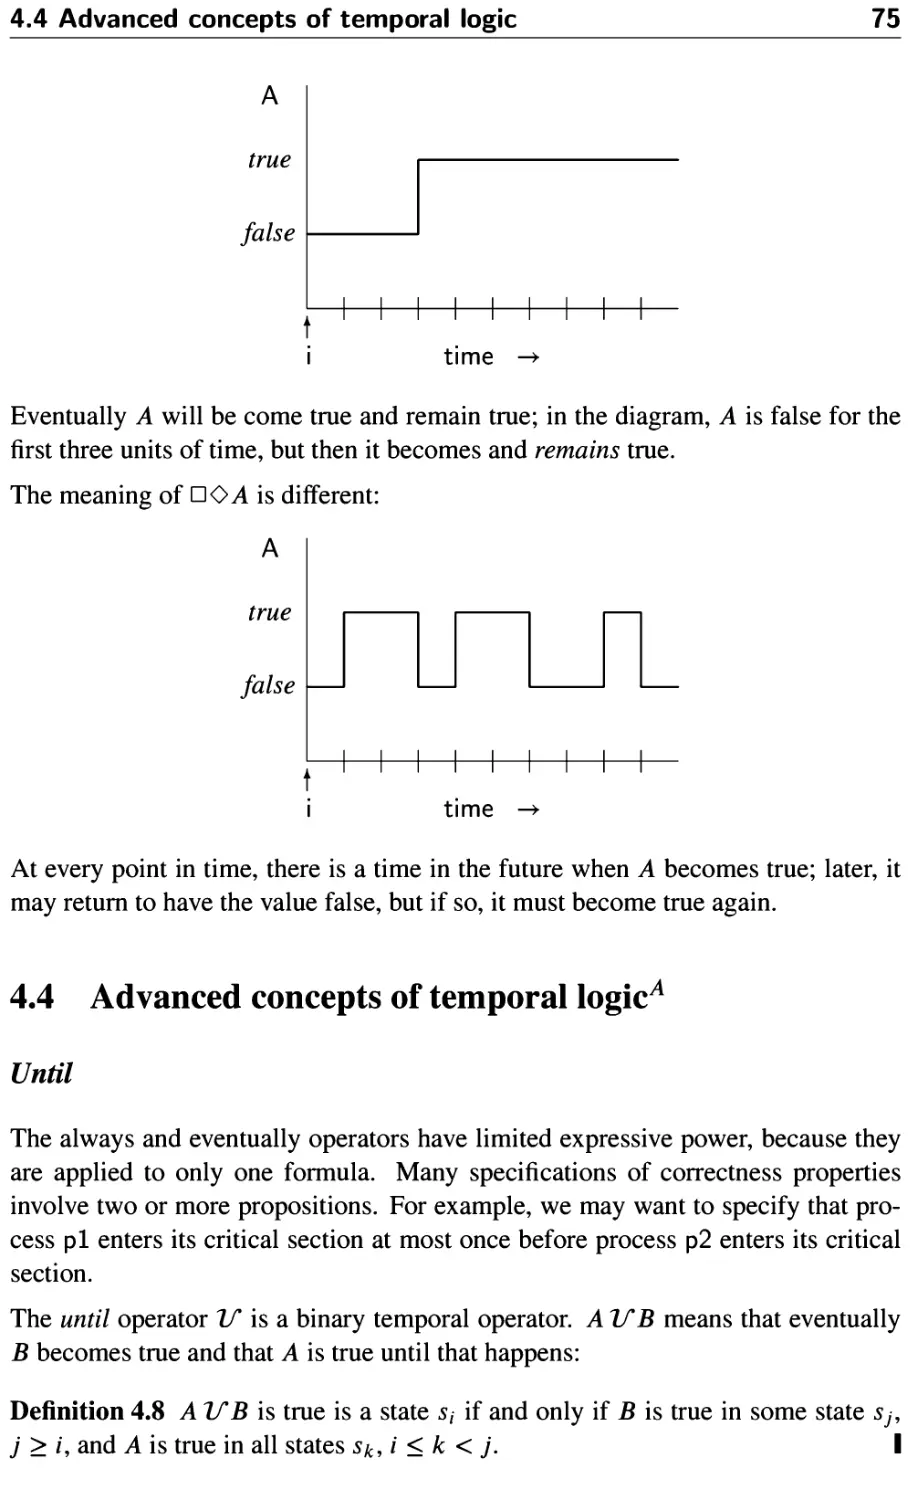 4.4 Advanced concepts of temporal logic